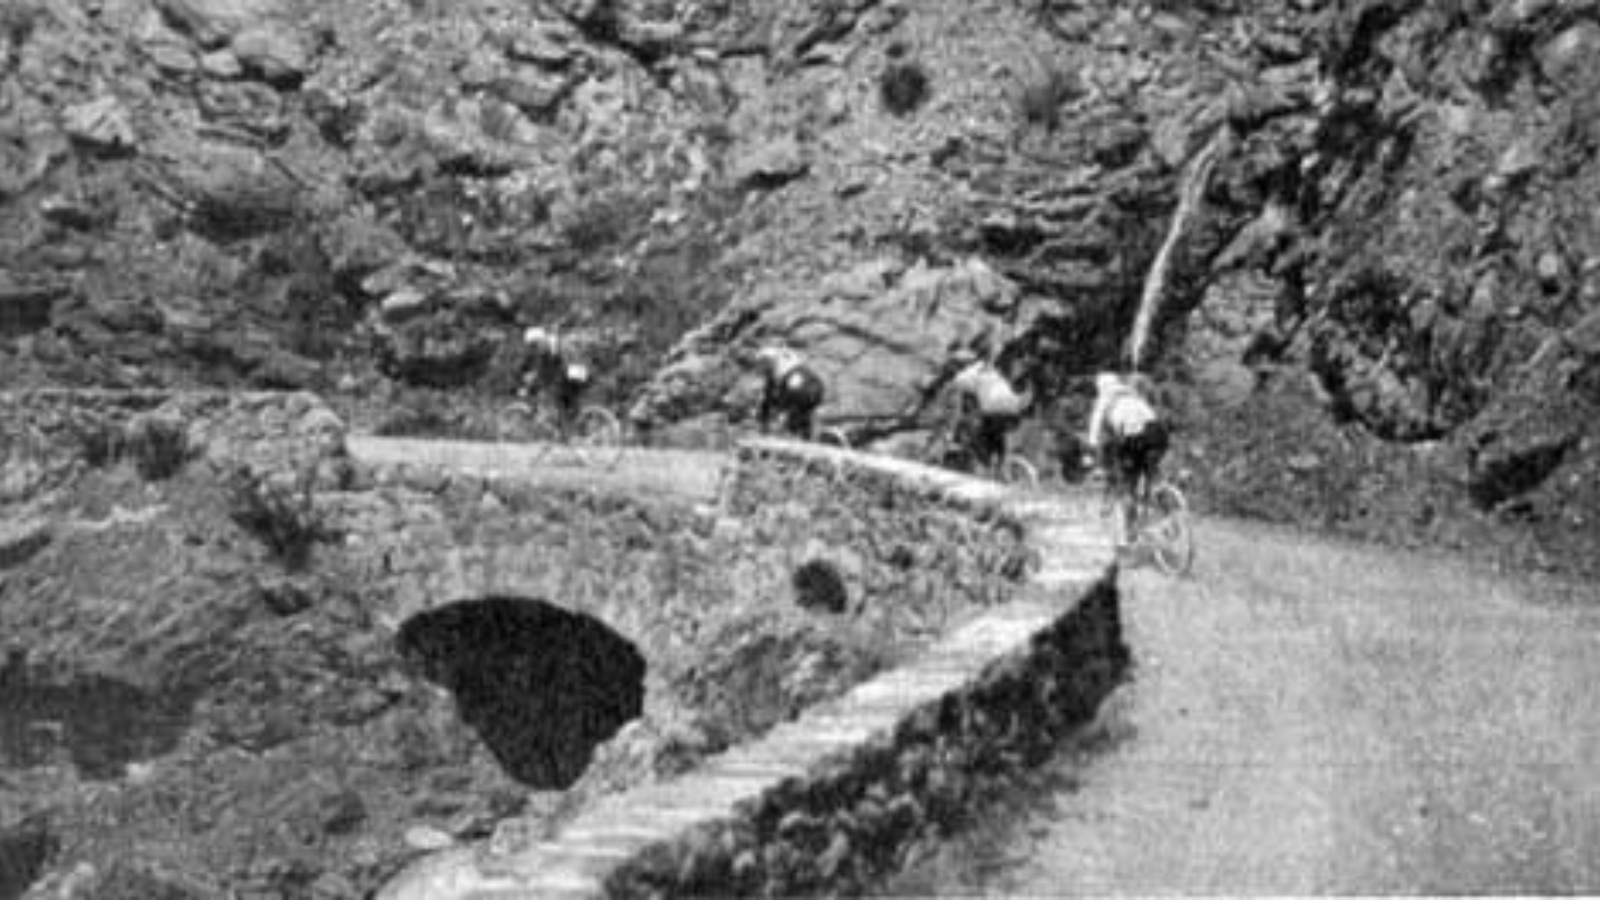 Cyclists riding a mountain stage at the Tour de France in 1912